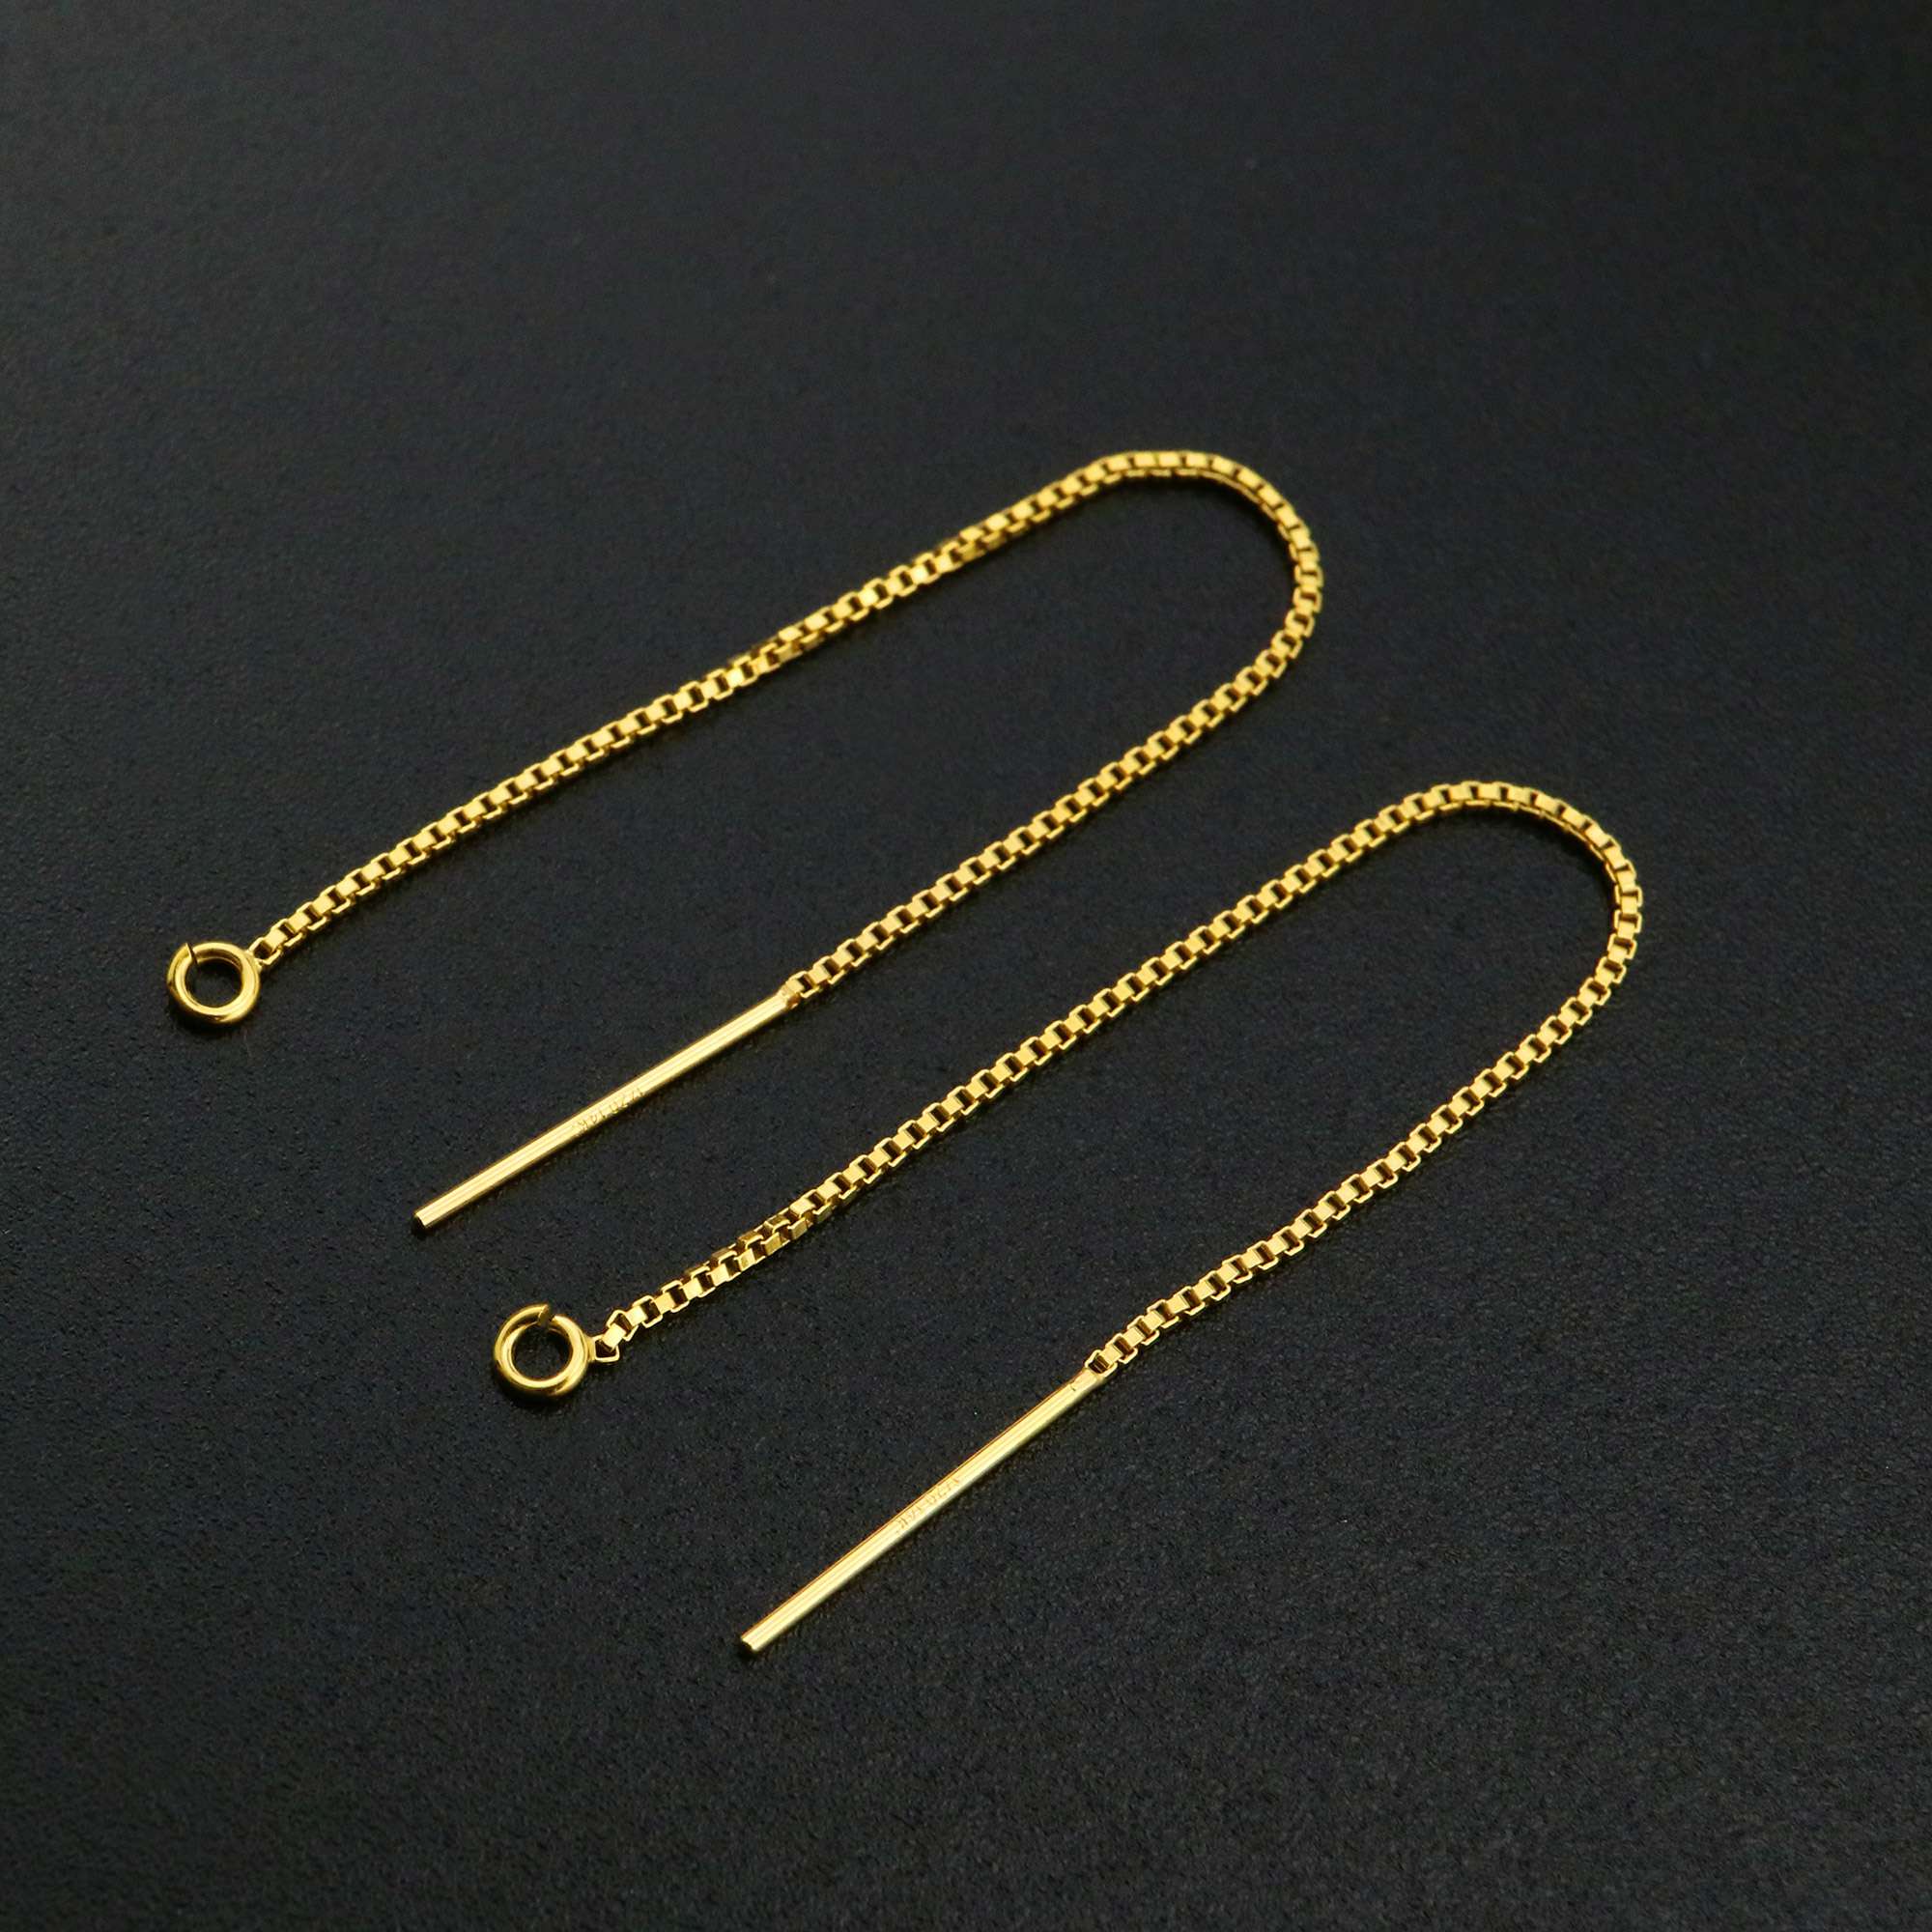 1Pair 14K Gold Filled Box Chain Wire Earrings with Open Loop DIY Supplies Findings for Beads 0.8MM Thick 80MM Long 1705069 - Click Image to Close